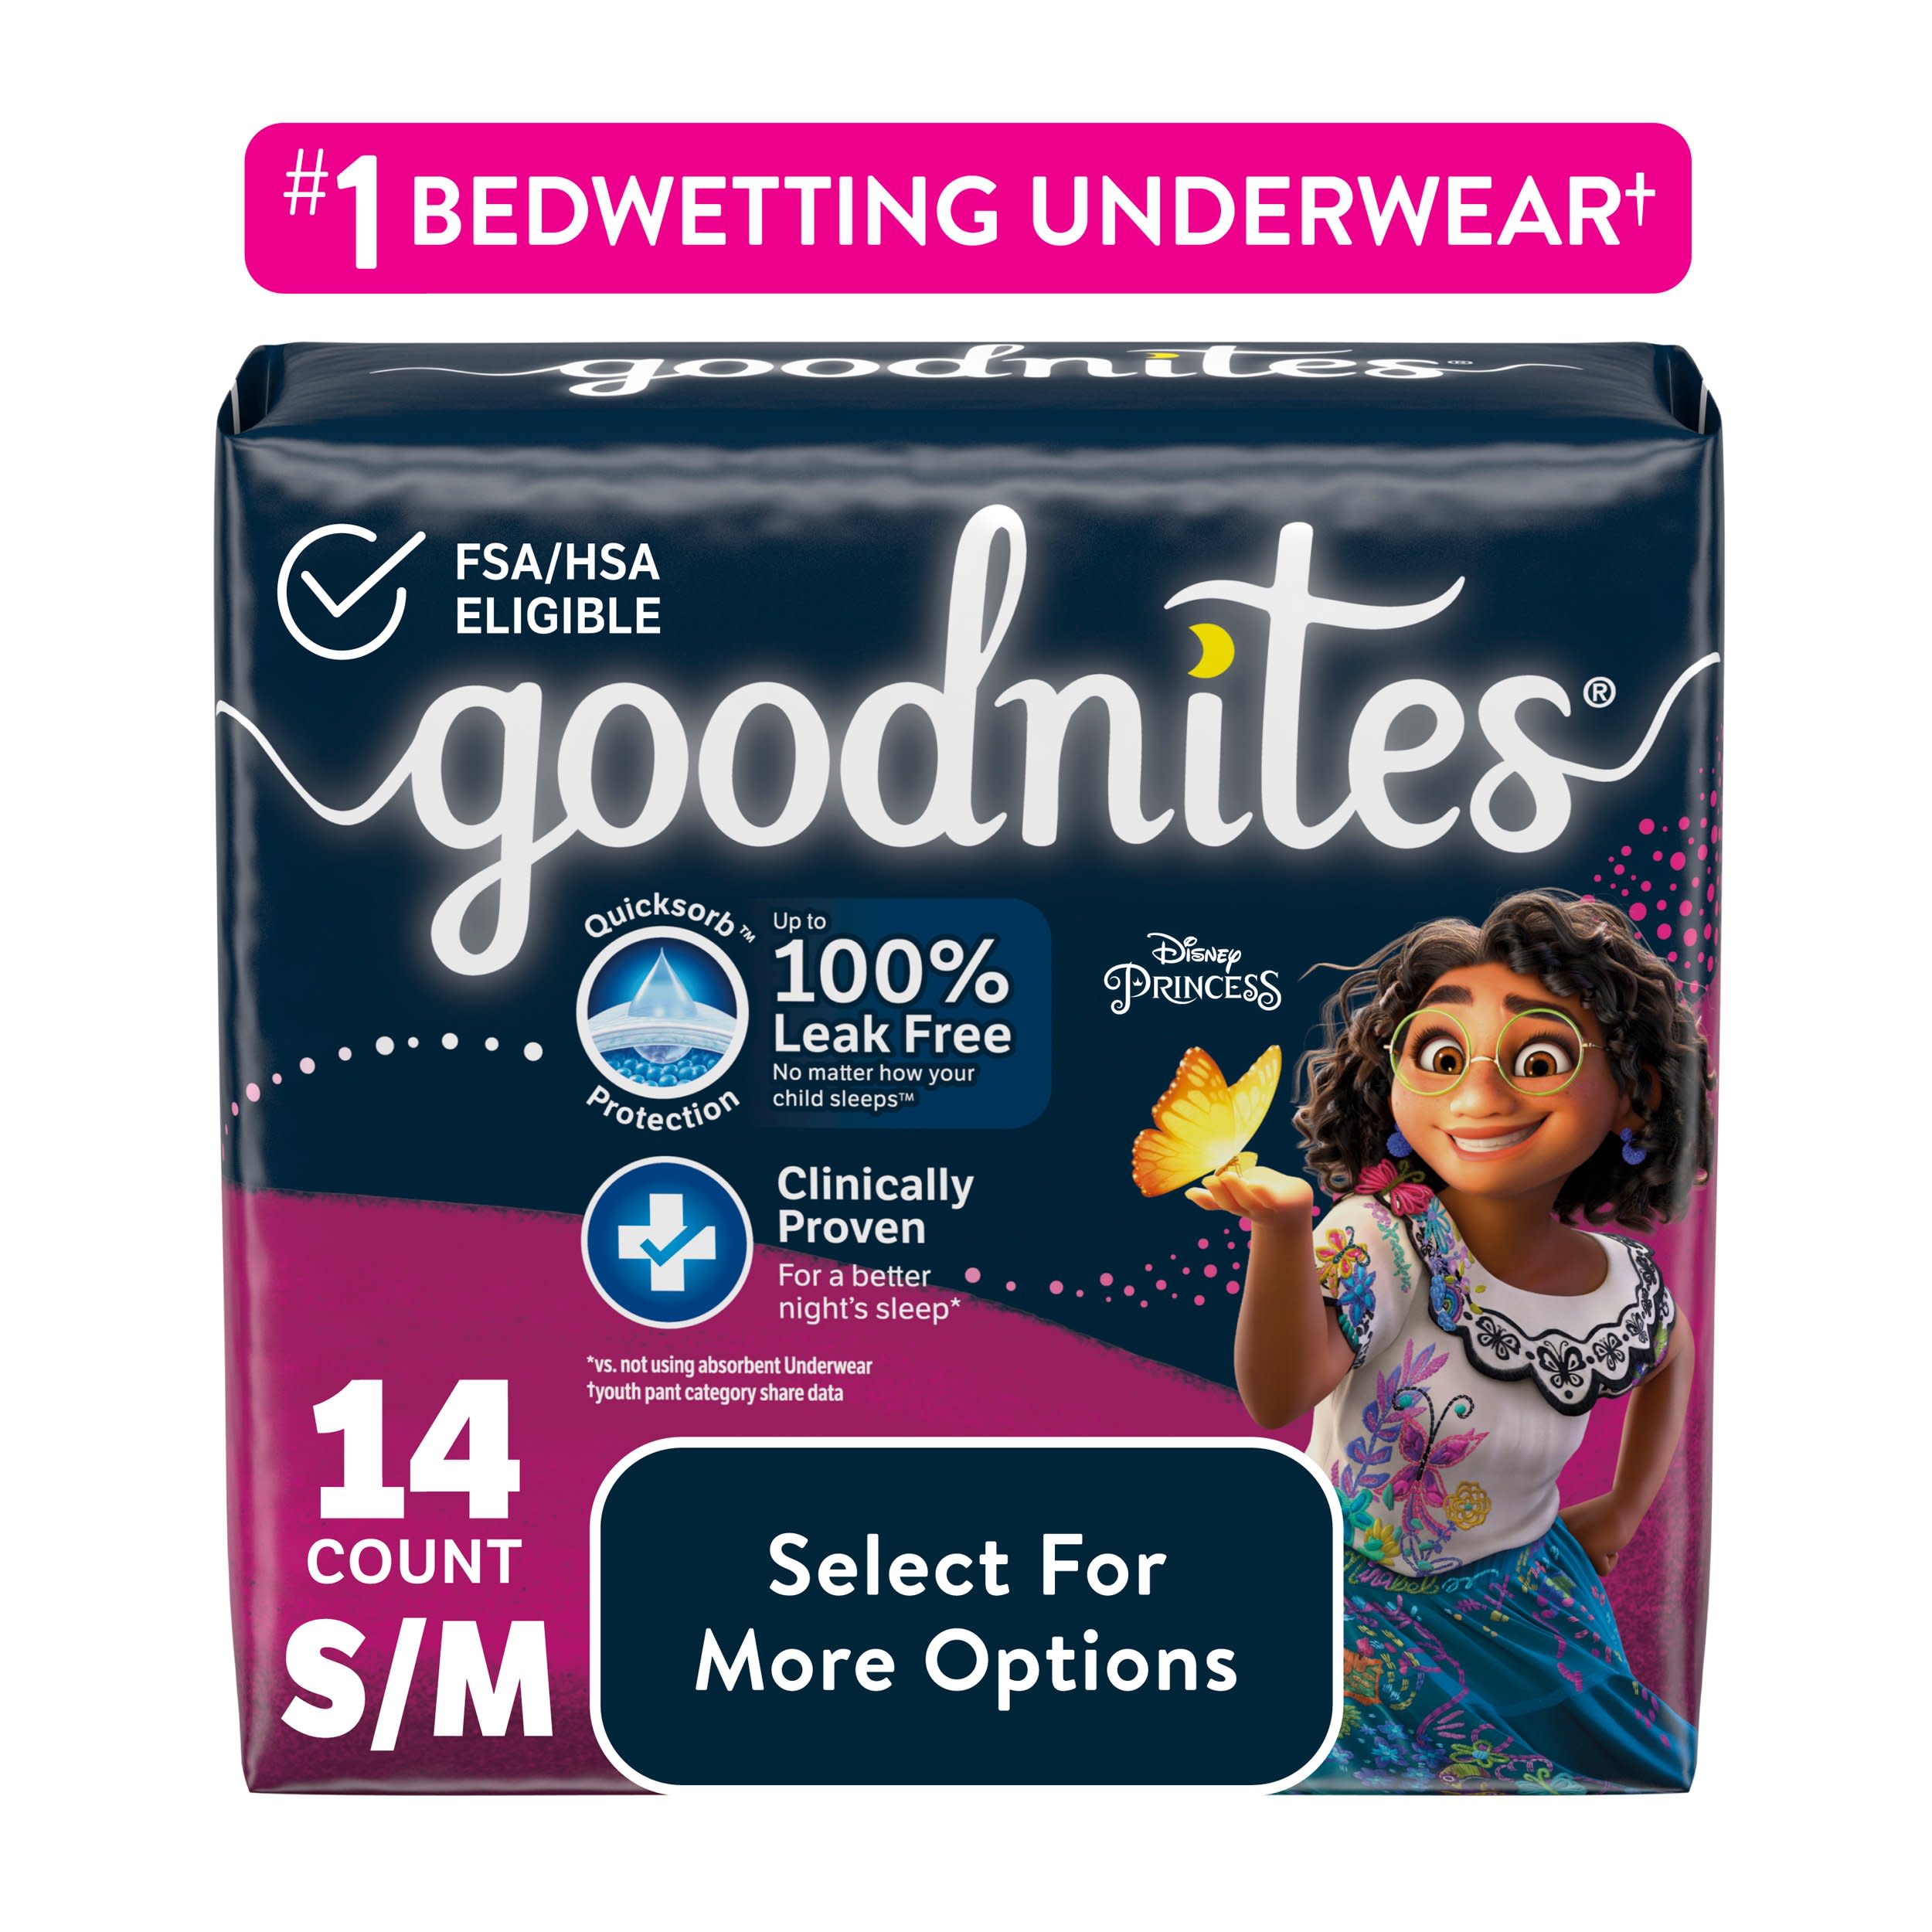 Goodnites Nighttime Bedwetting Underwear for Girls, S/M, 14 Ct (Select for More Options) - image 1 of 10